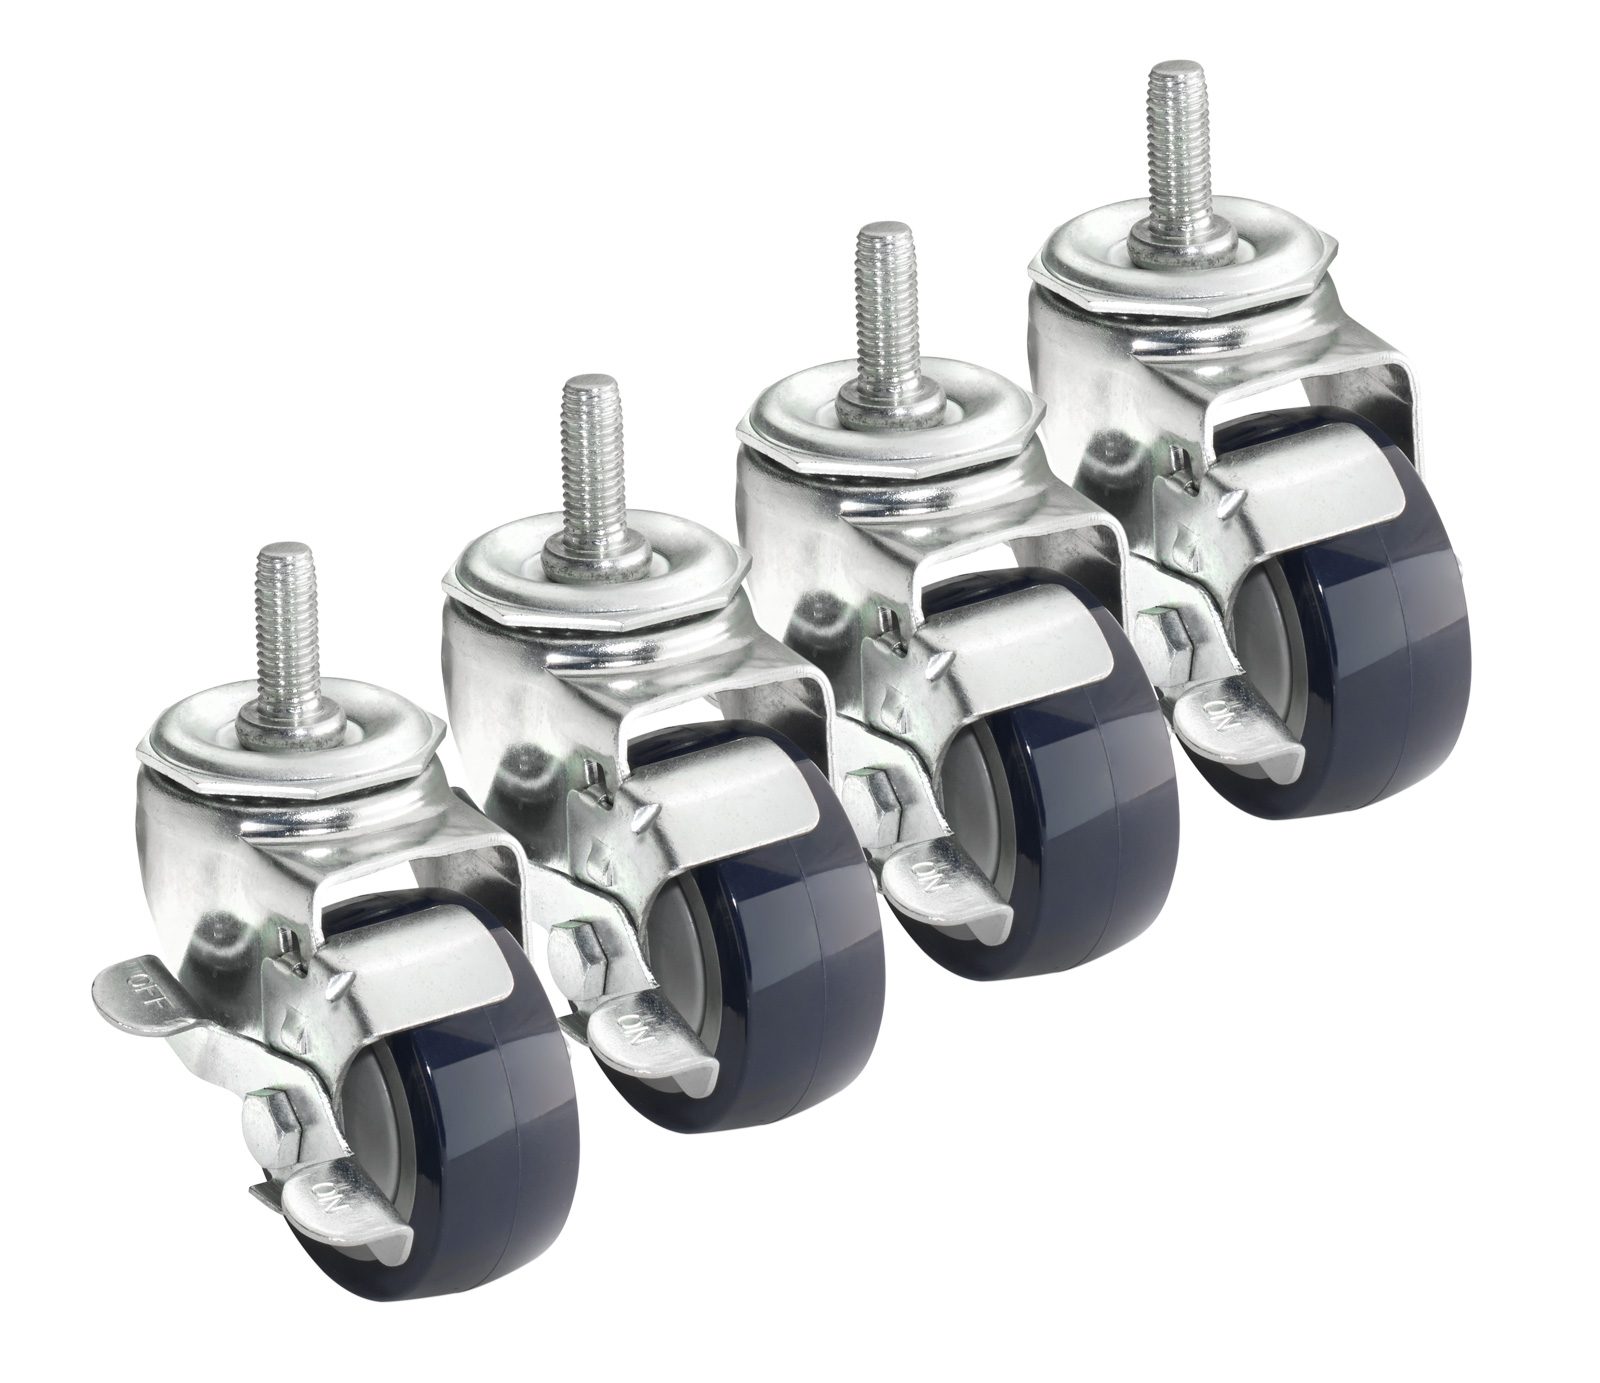 4" threaded stem caster with brakes Set of 4 